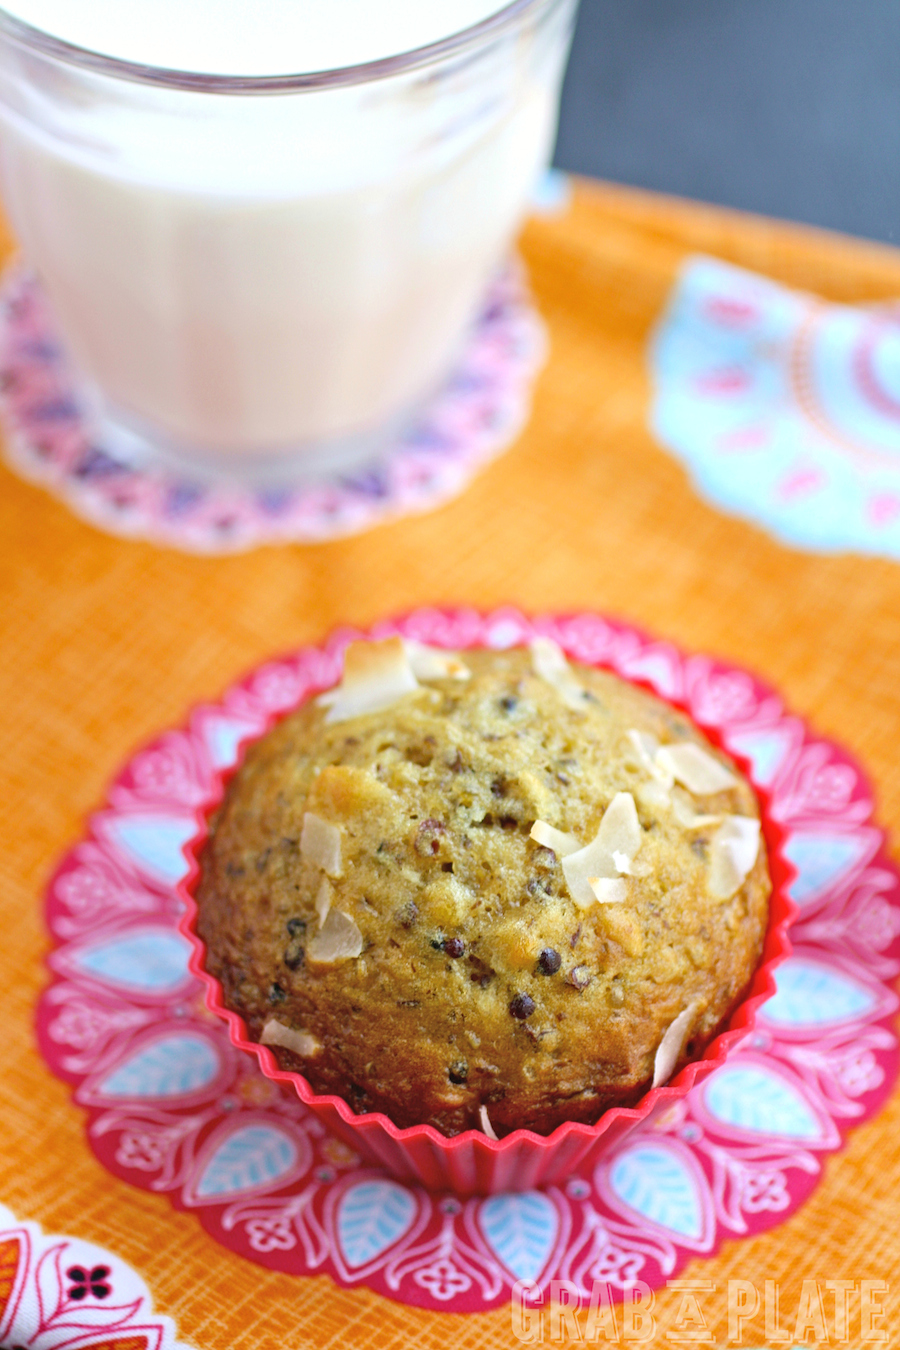 Enjoy these filling and tasty Quinoa, Coconut and Date Muffins